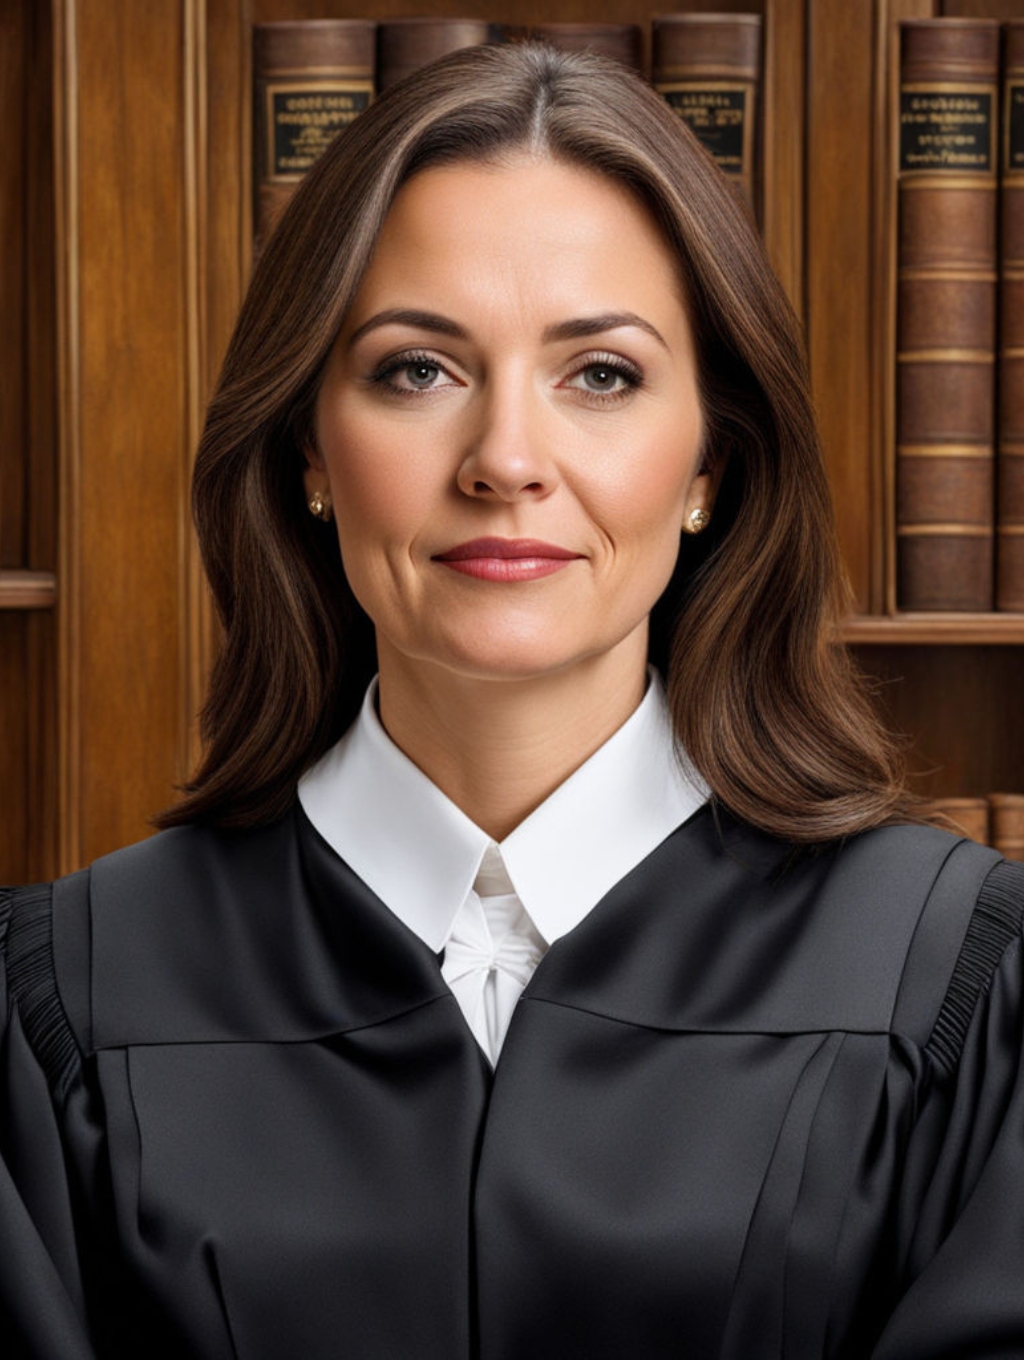 Lawyers & Judges Women: Profile Pictures & Wall Frames-Theme:2